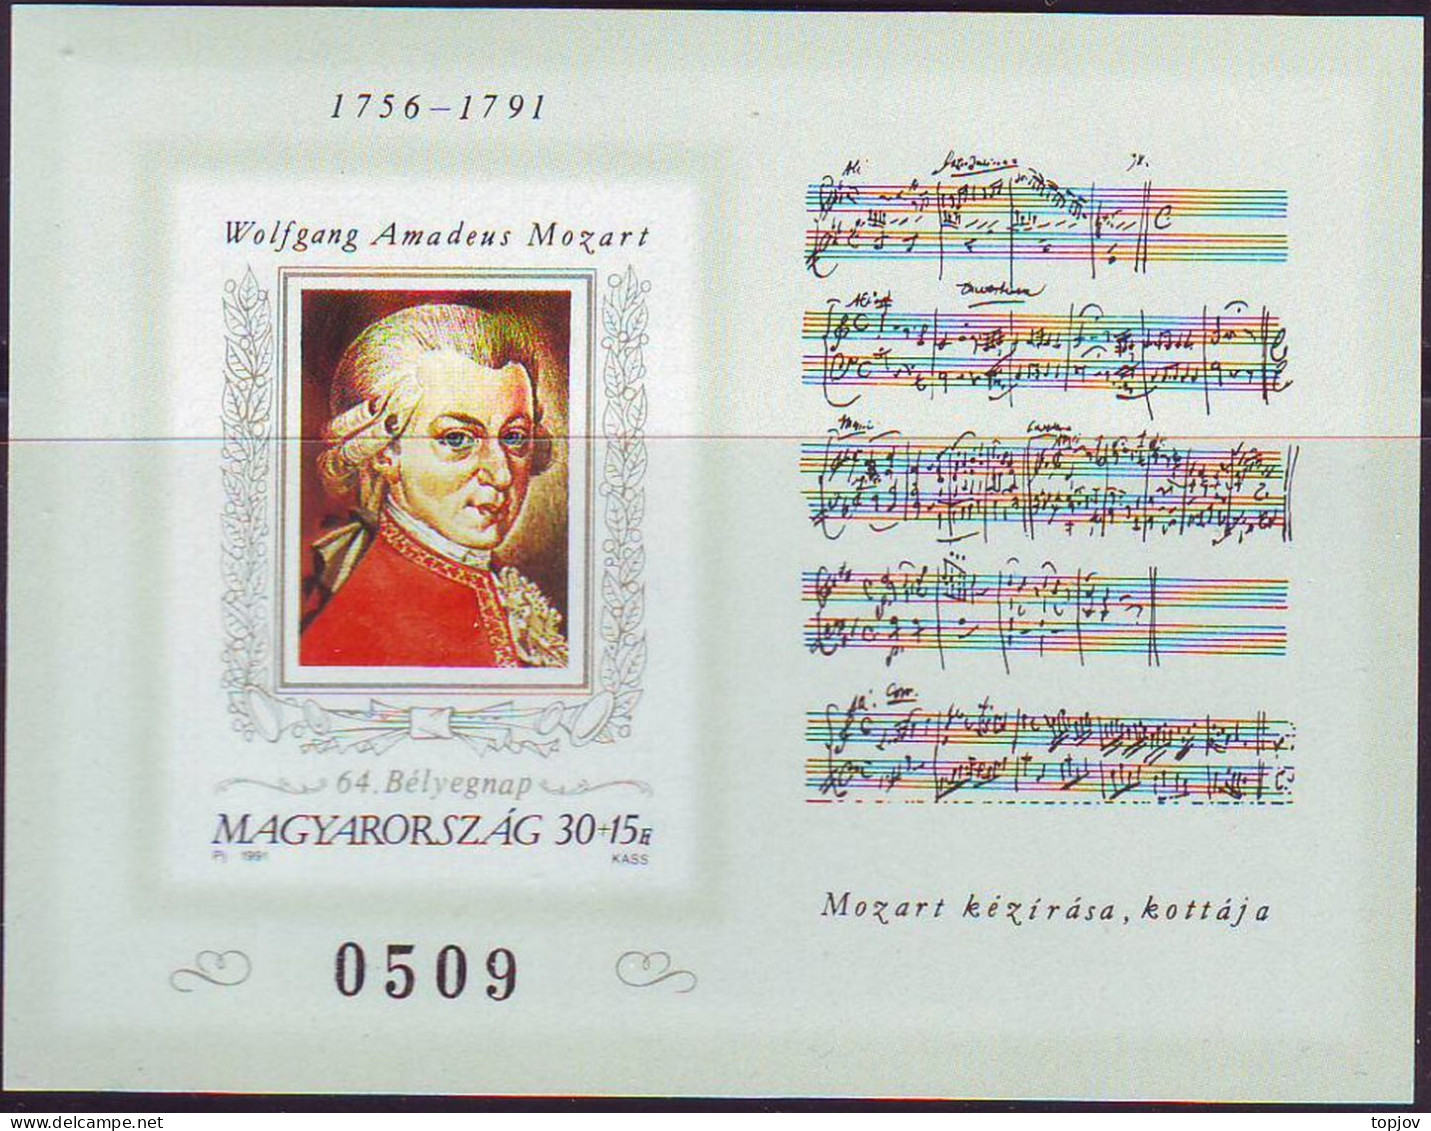 HUNGARY - MOZART MUSIC HANDcuff - IMPERF - **MNH - 1991 - Commemorative Sheets